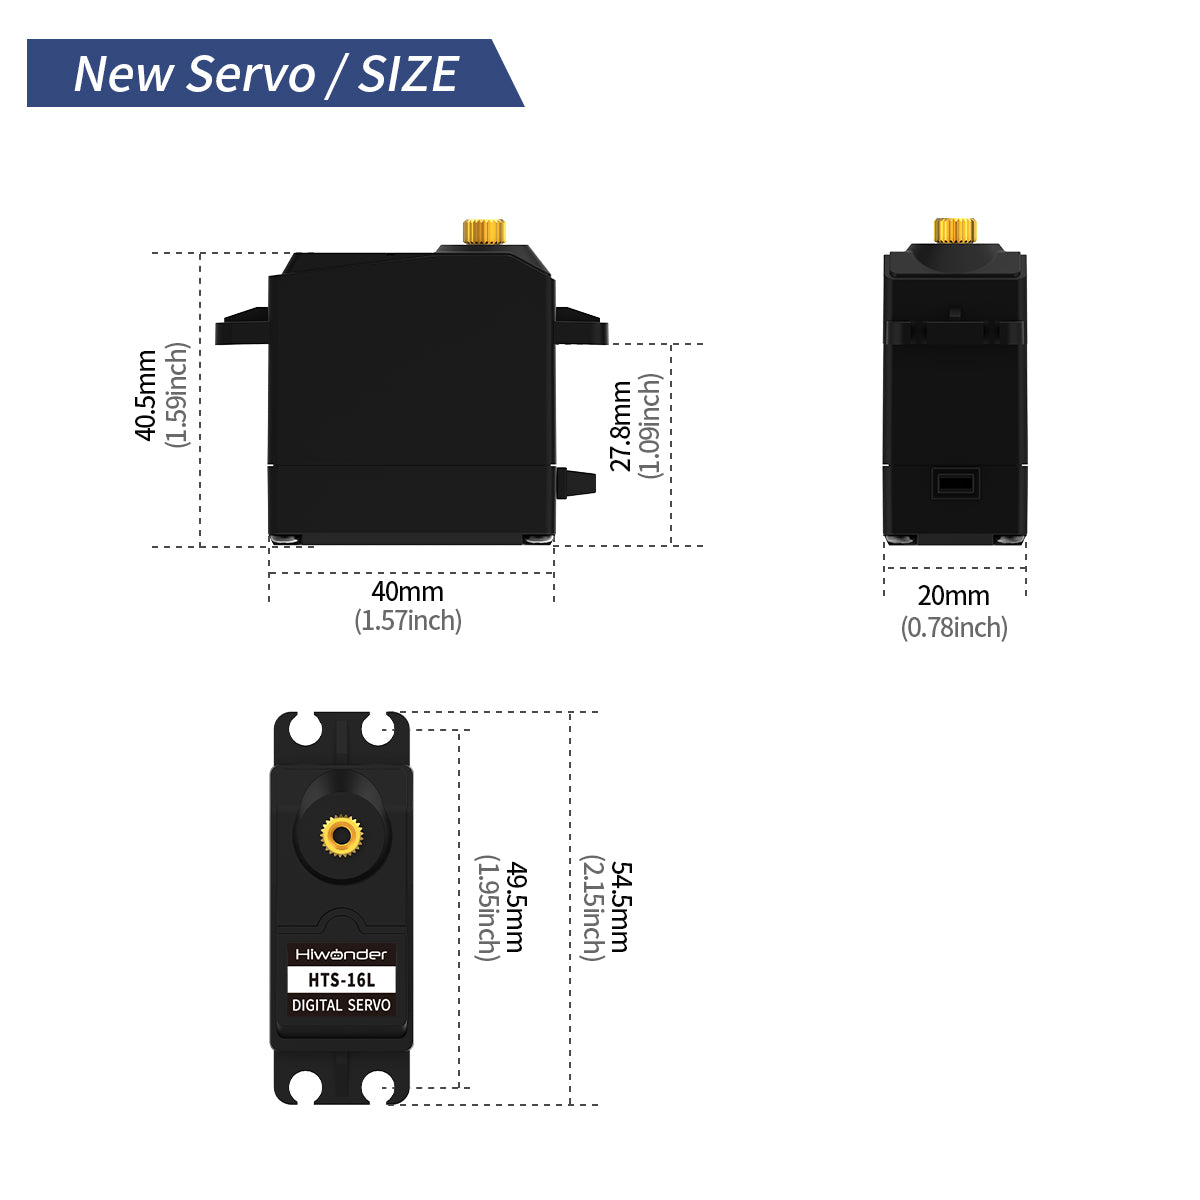 Serial Bus Servo Anti-burning and Anti-blocking Intelligent Serial Port High Torque High Precision with Feedback Dedicated for Mechanical Claws